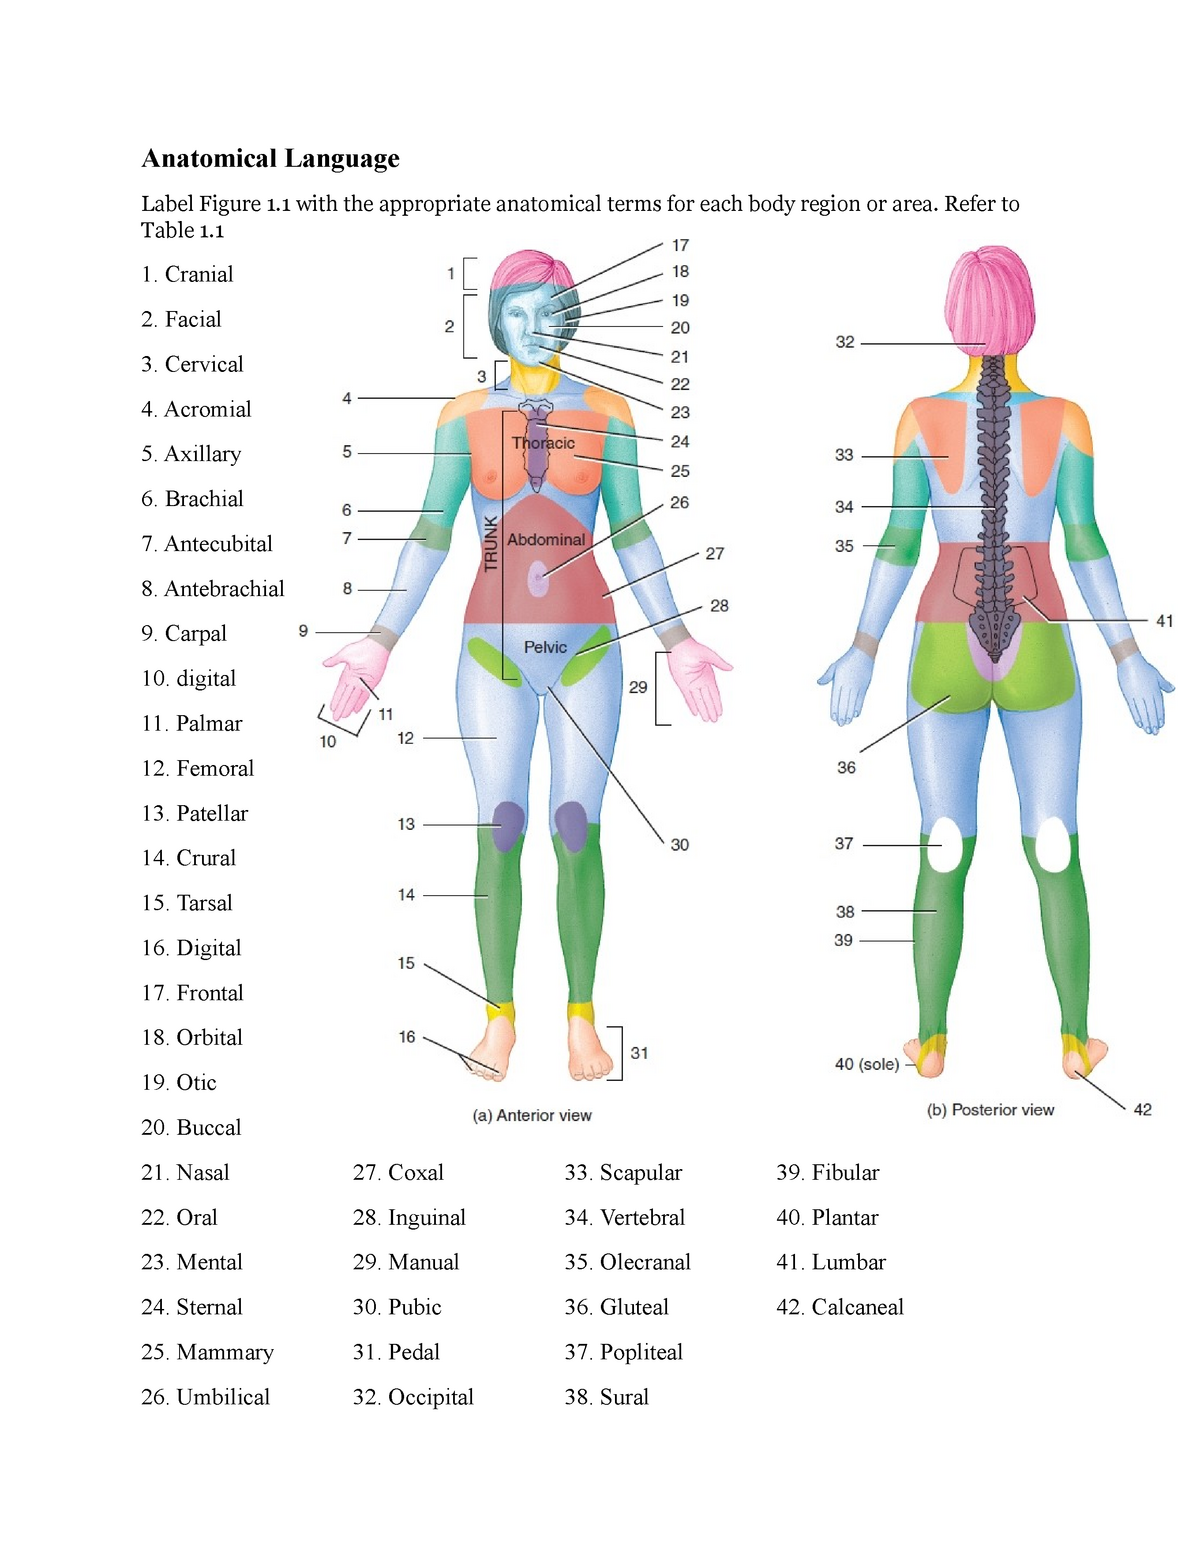 A P 1 Lab Exercise 1 Lab Worksheet Anatomical Language Label Figure 1 With The Appropriate Studocu